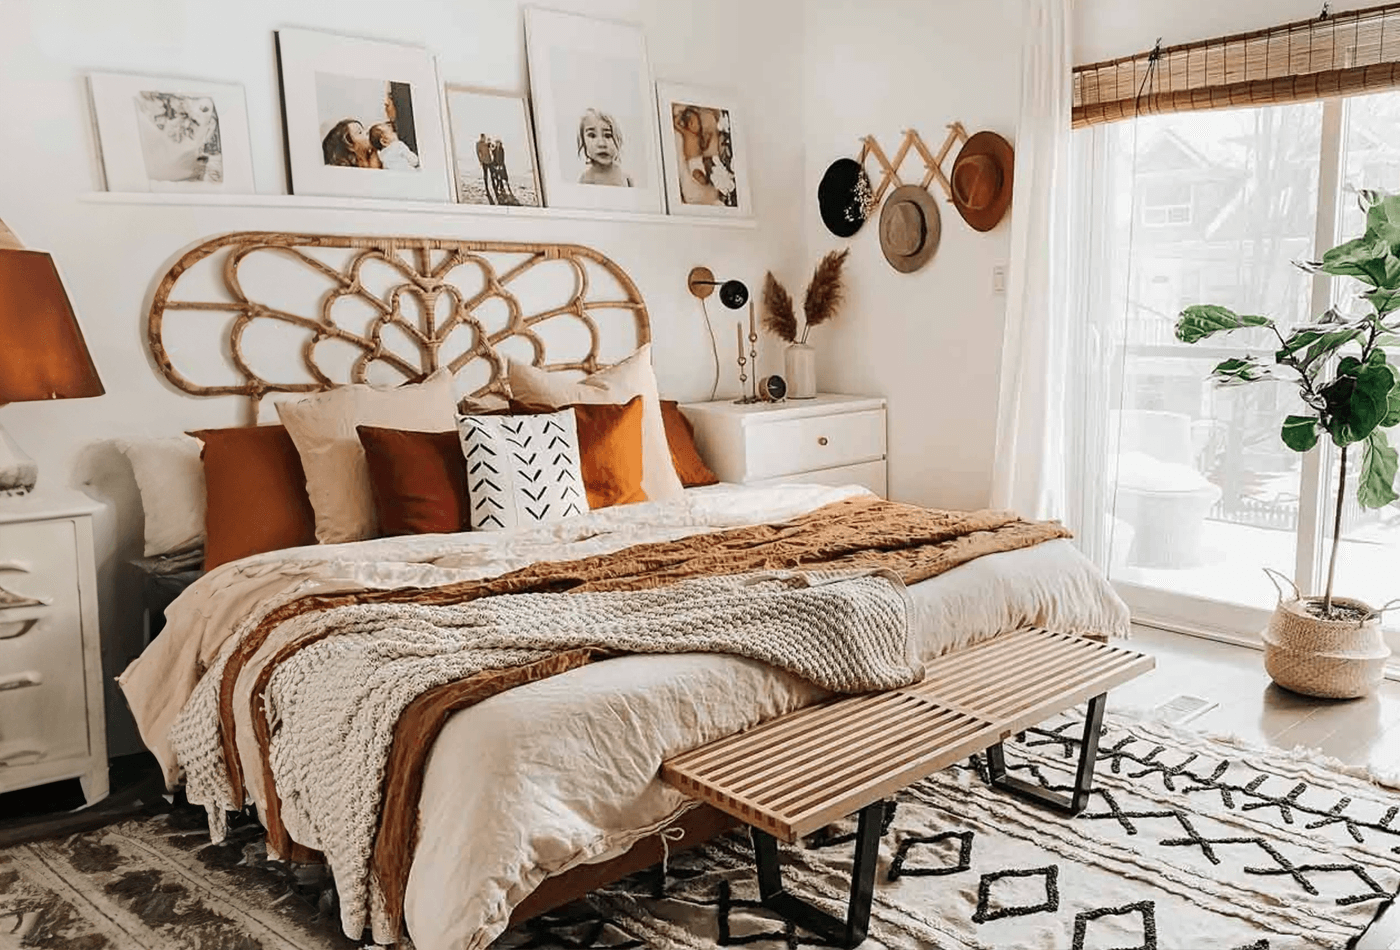 Boho Decor: Create A Stylish And Eclectic Home Ambiance